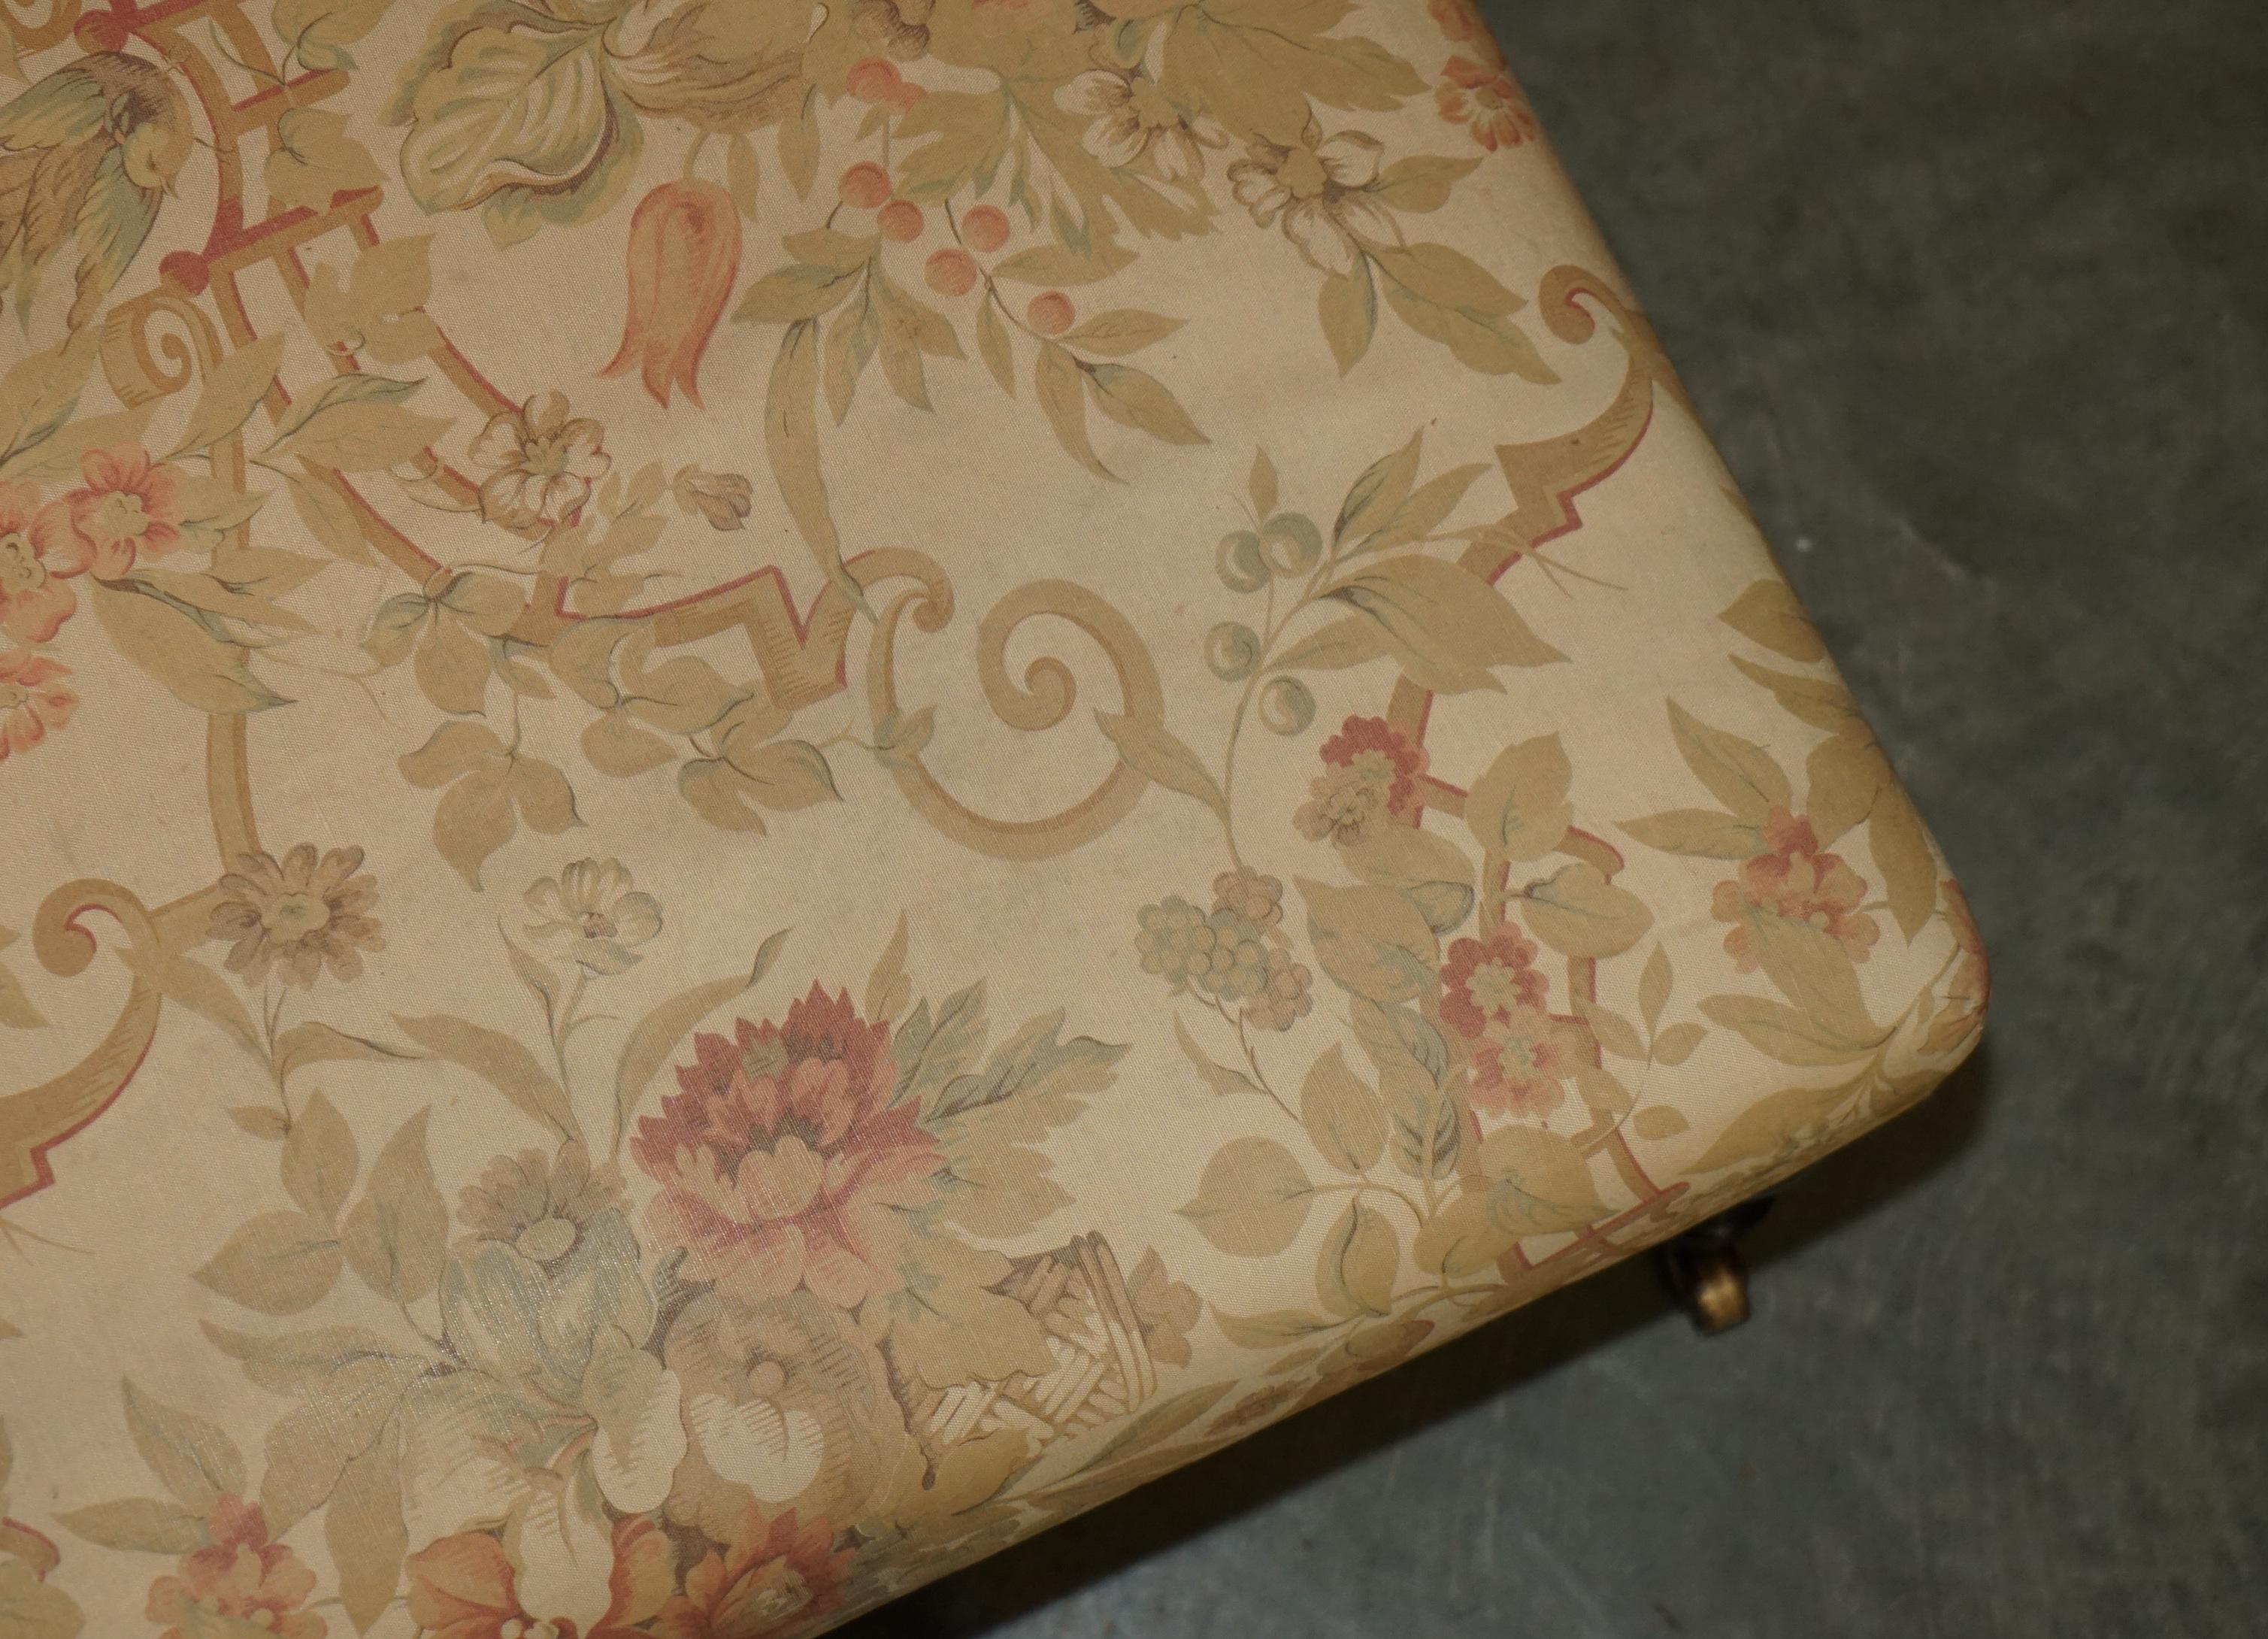 COLLECTABLE VERY LARGE ViNTAGE GEORGE SMITH CHELSEA FLORAL FOOTSTOOL OTTOMAN For Sale 1